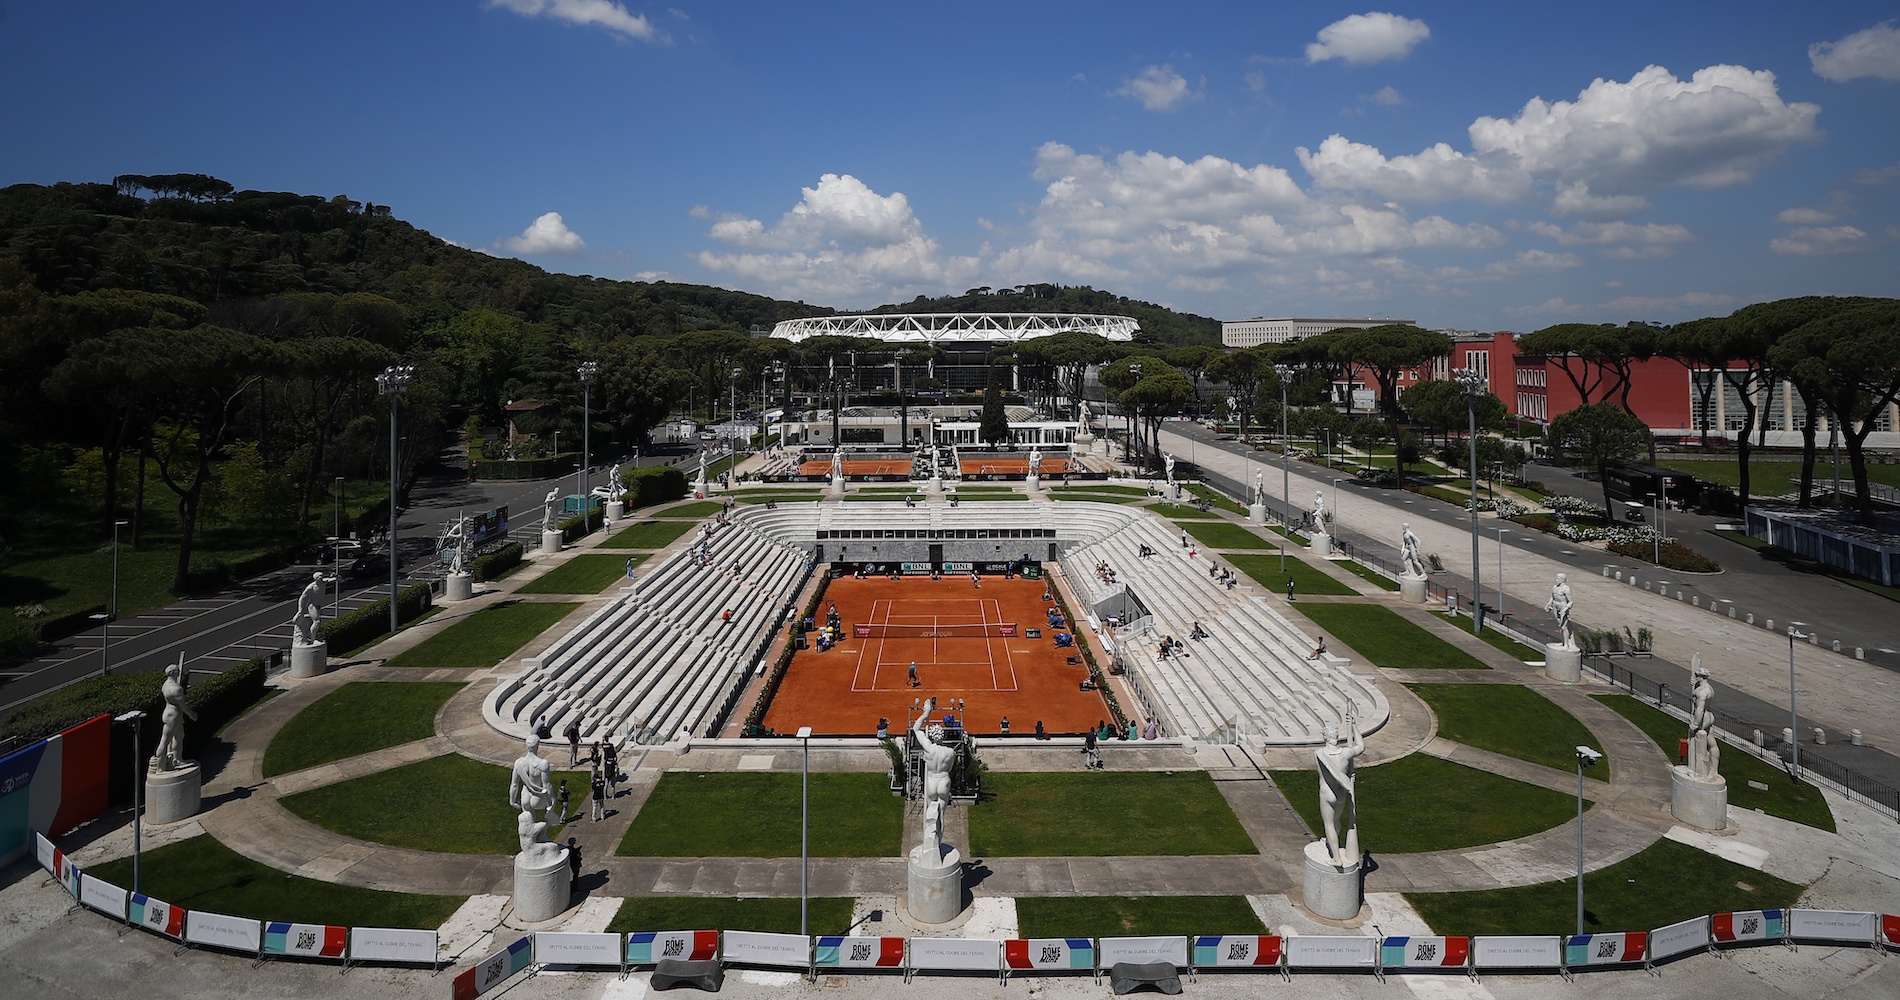 Italy considering ban on Russian tennis players for Italian Open